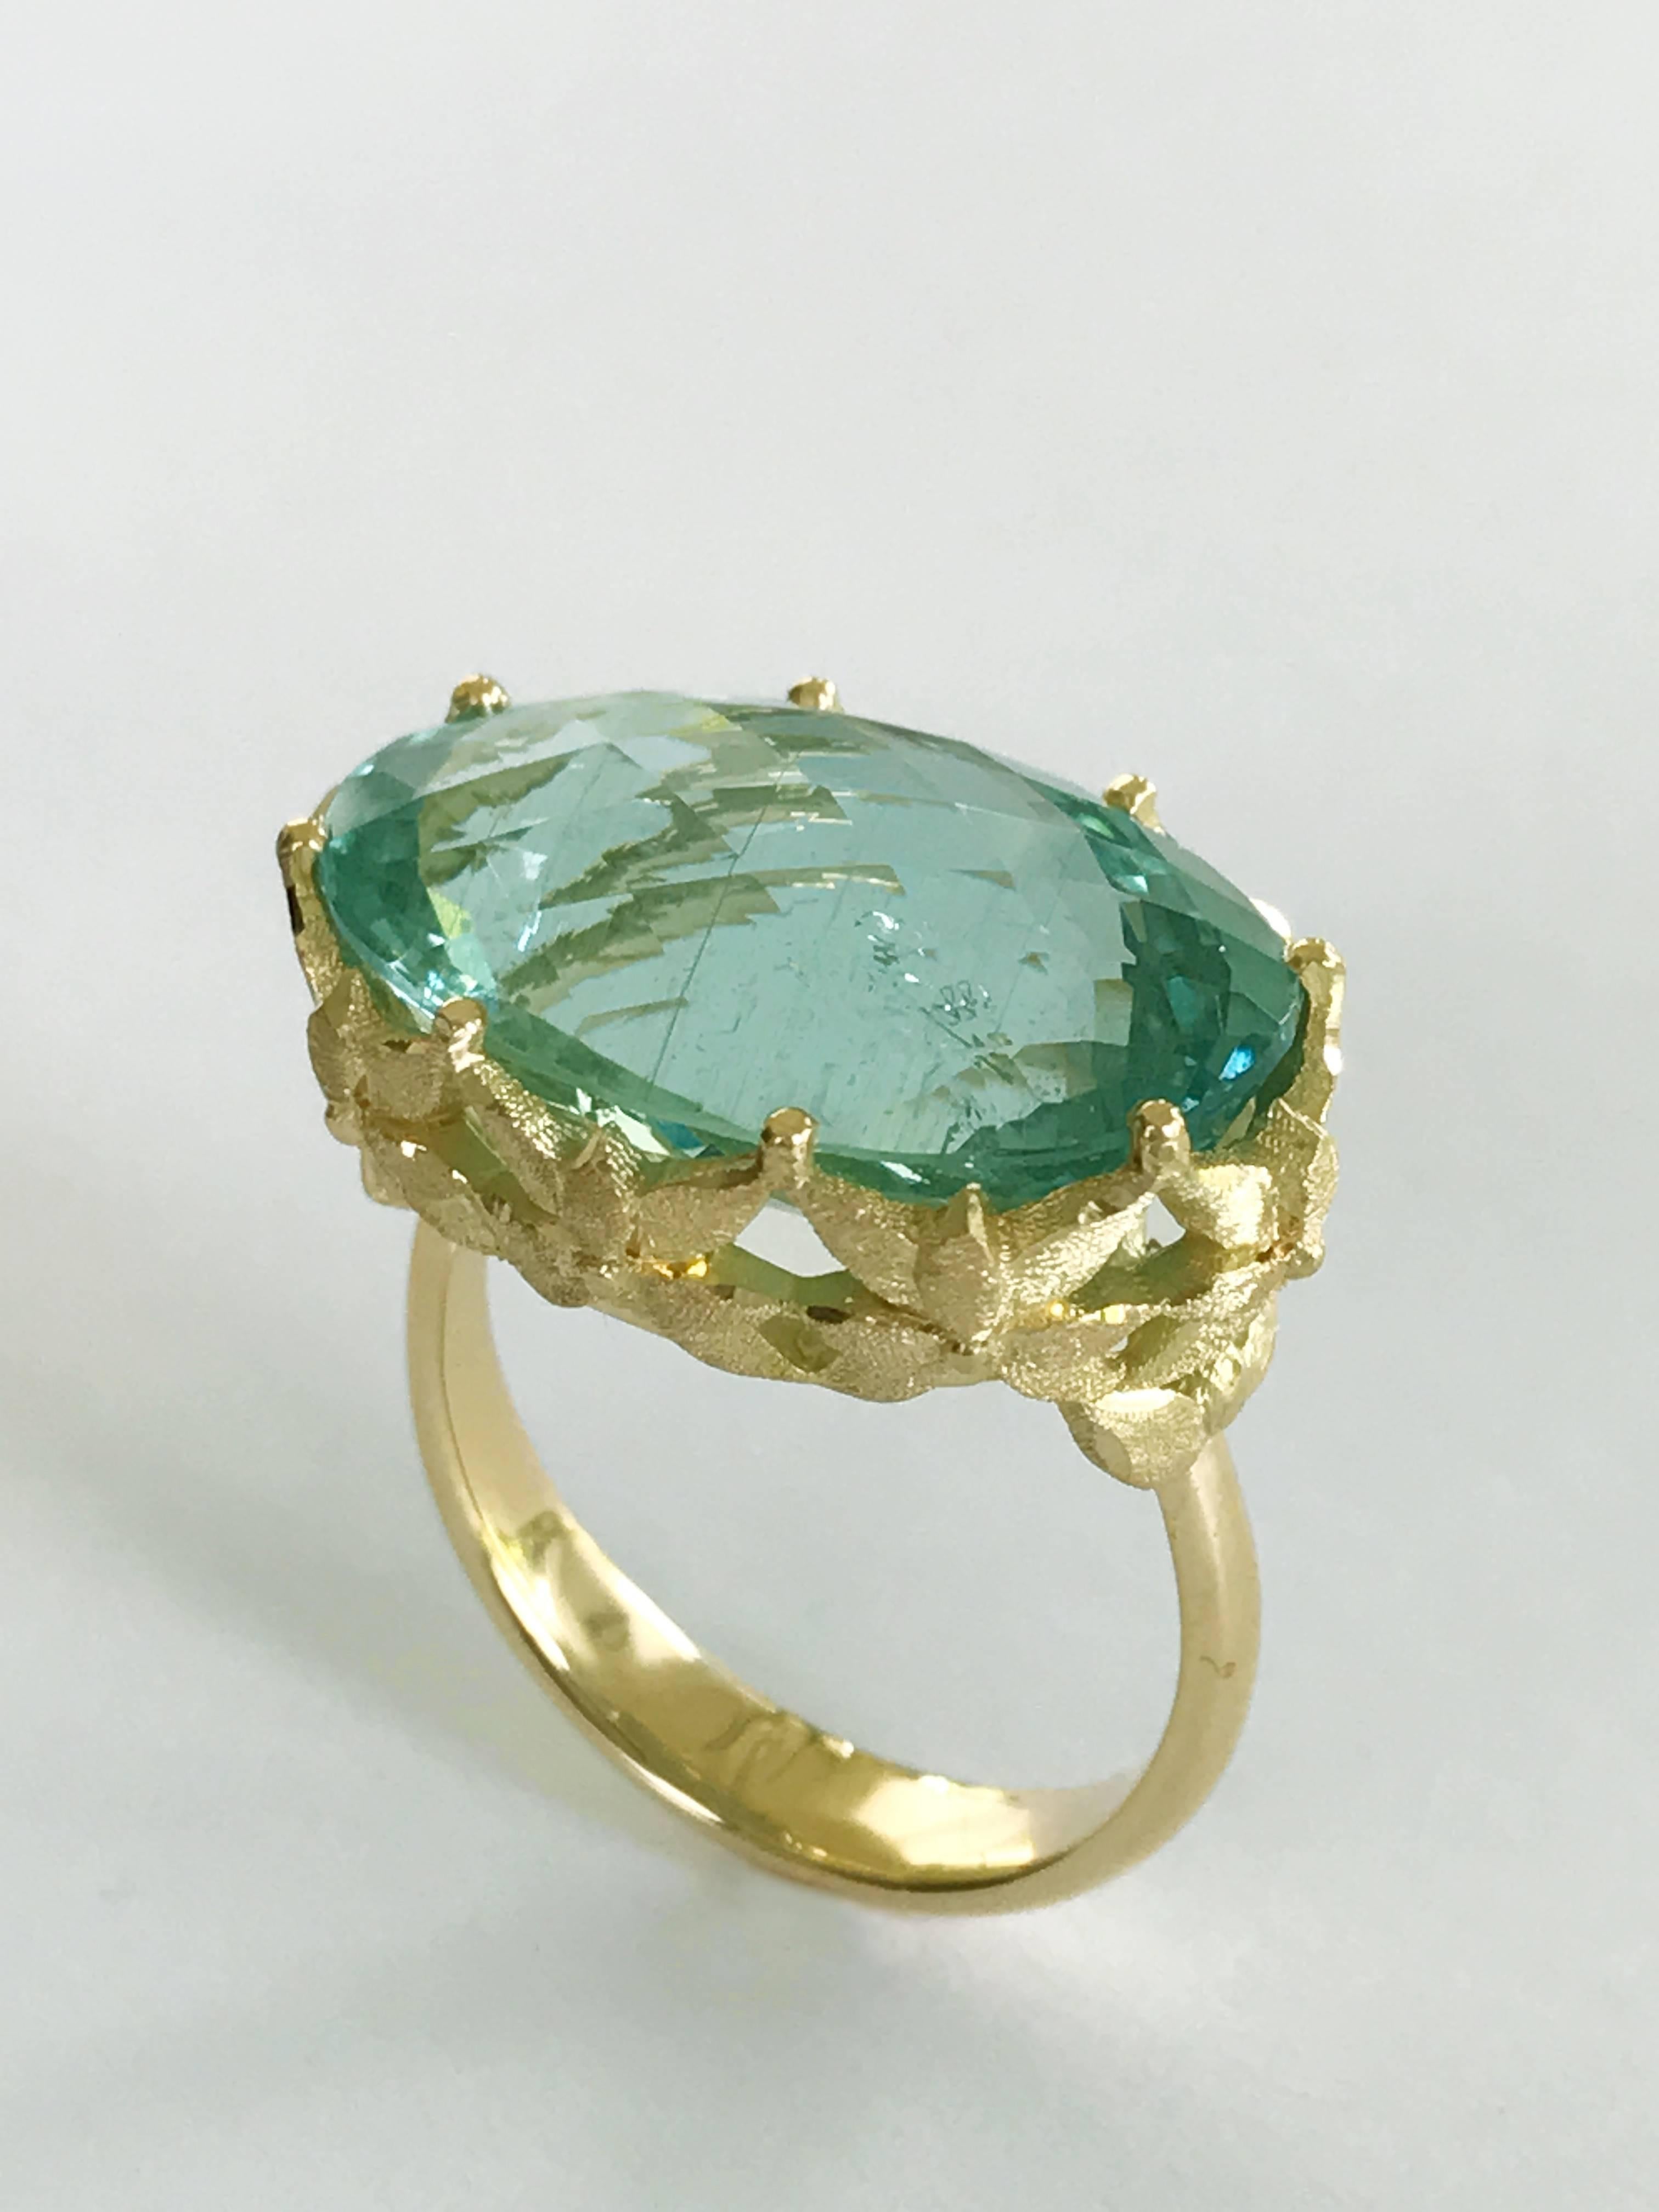 Dalben design 18 kt engraved yellow gold Cocktail Ring with an Oval cut  Aquamarine weighting 13,40 carat .  
Ring size 6 3/4 USA - 54 EU resizable to most finger sizes.  
Bezel setting dimension: 
width 22,5 mm, height 15,2 mm.  
The Ring has been